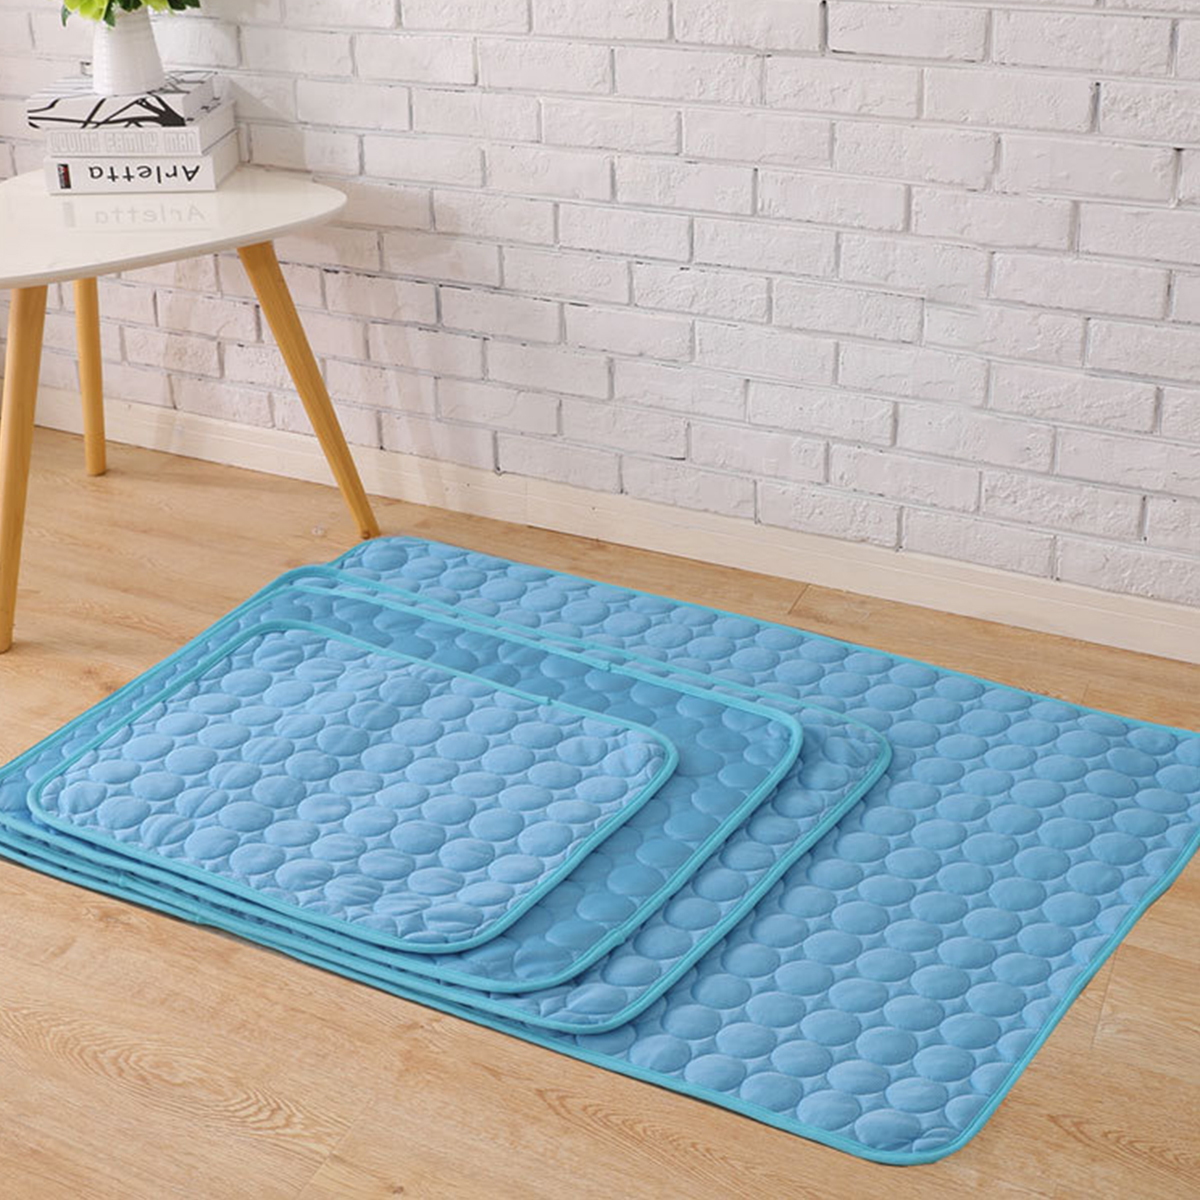 

Pets Cooling Mat Non-Toxic Cool Pad Cooling Pad Bed Summer Dogs Cats Cushion